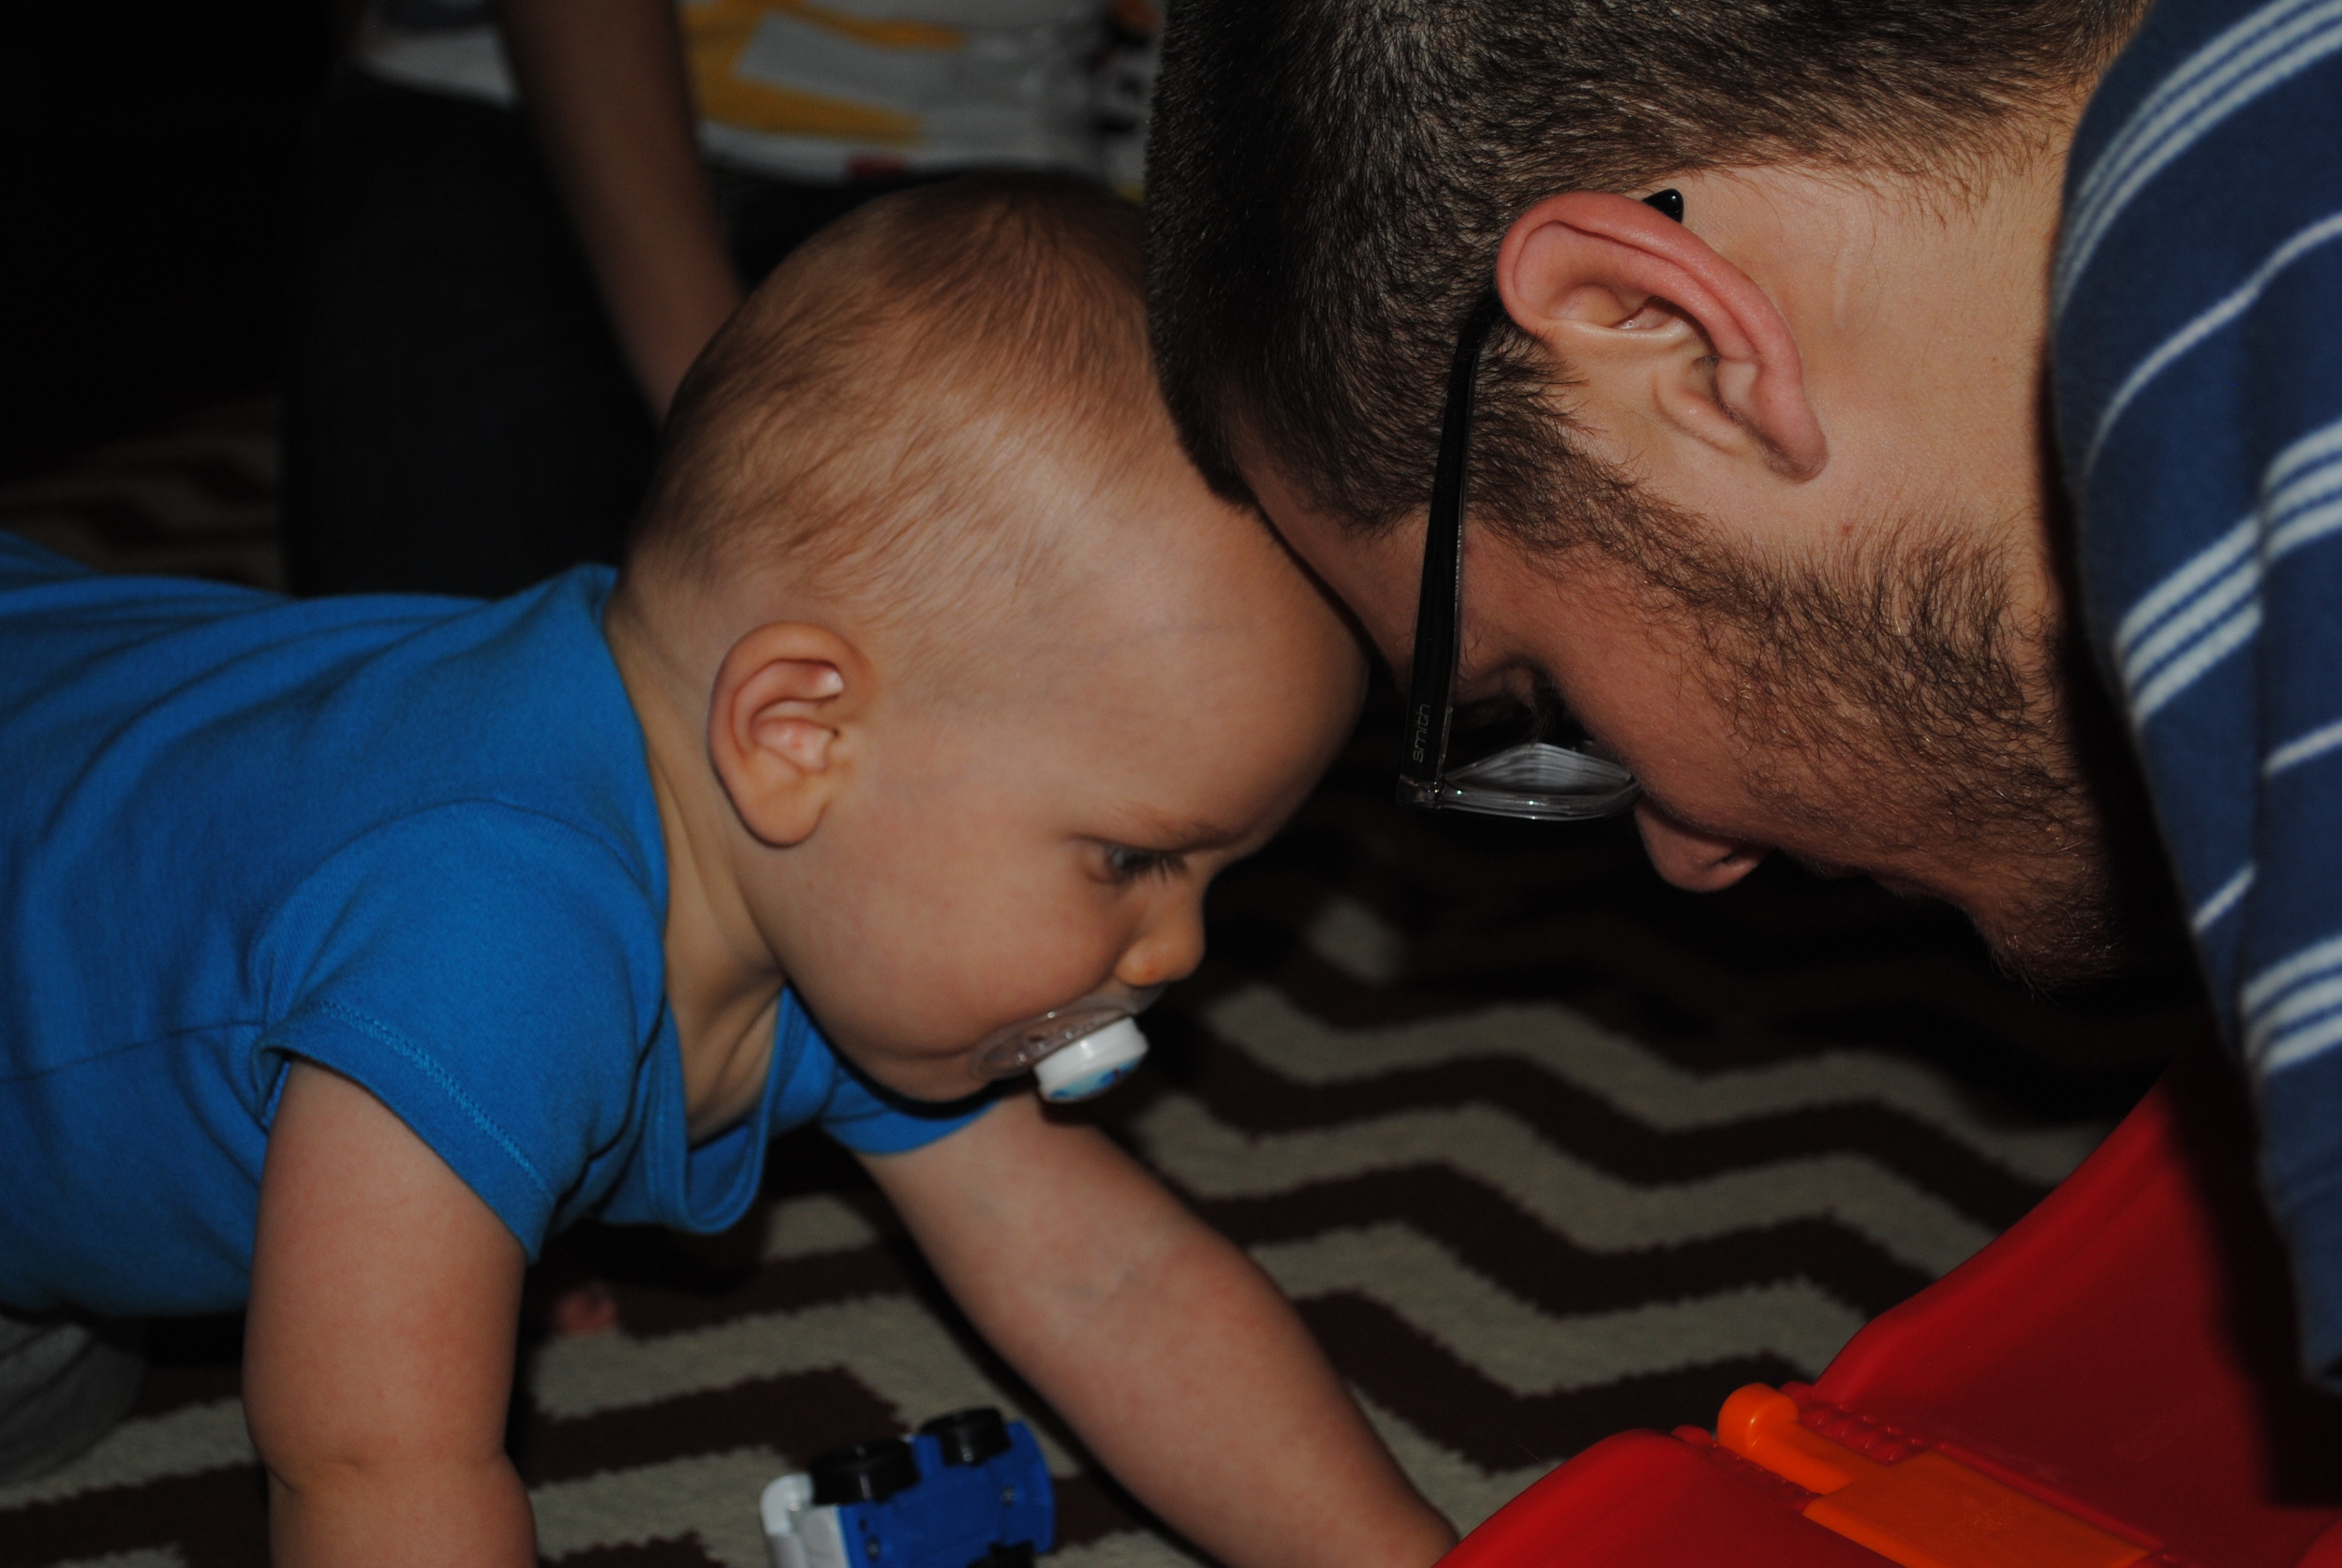 Putting their beautiful heads together. My son playing with his son. A treasured moment in time.